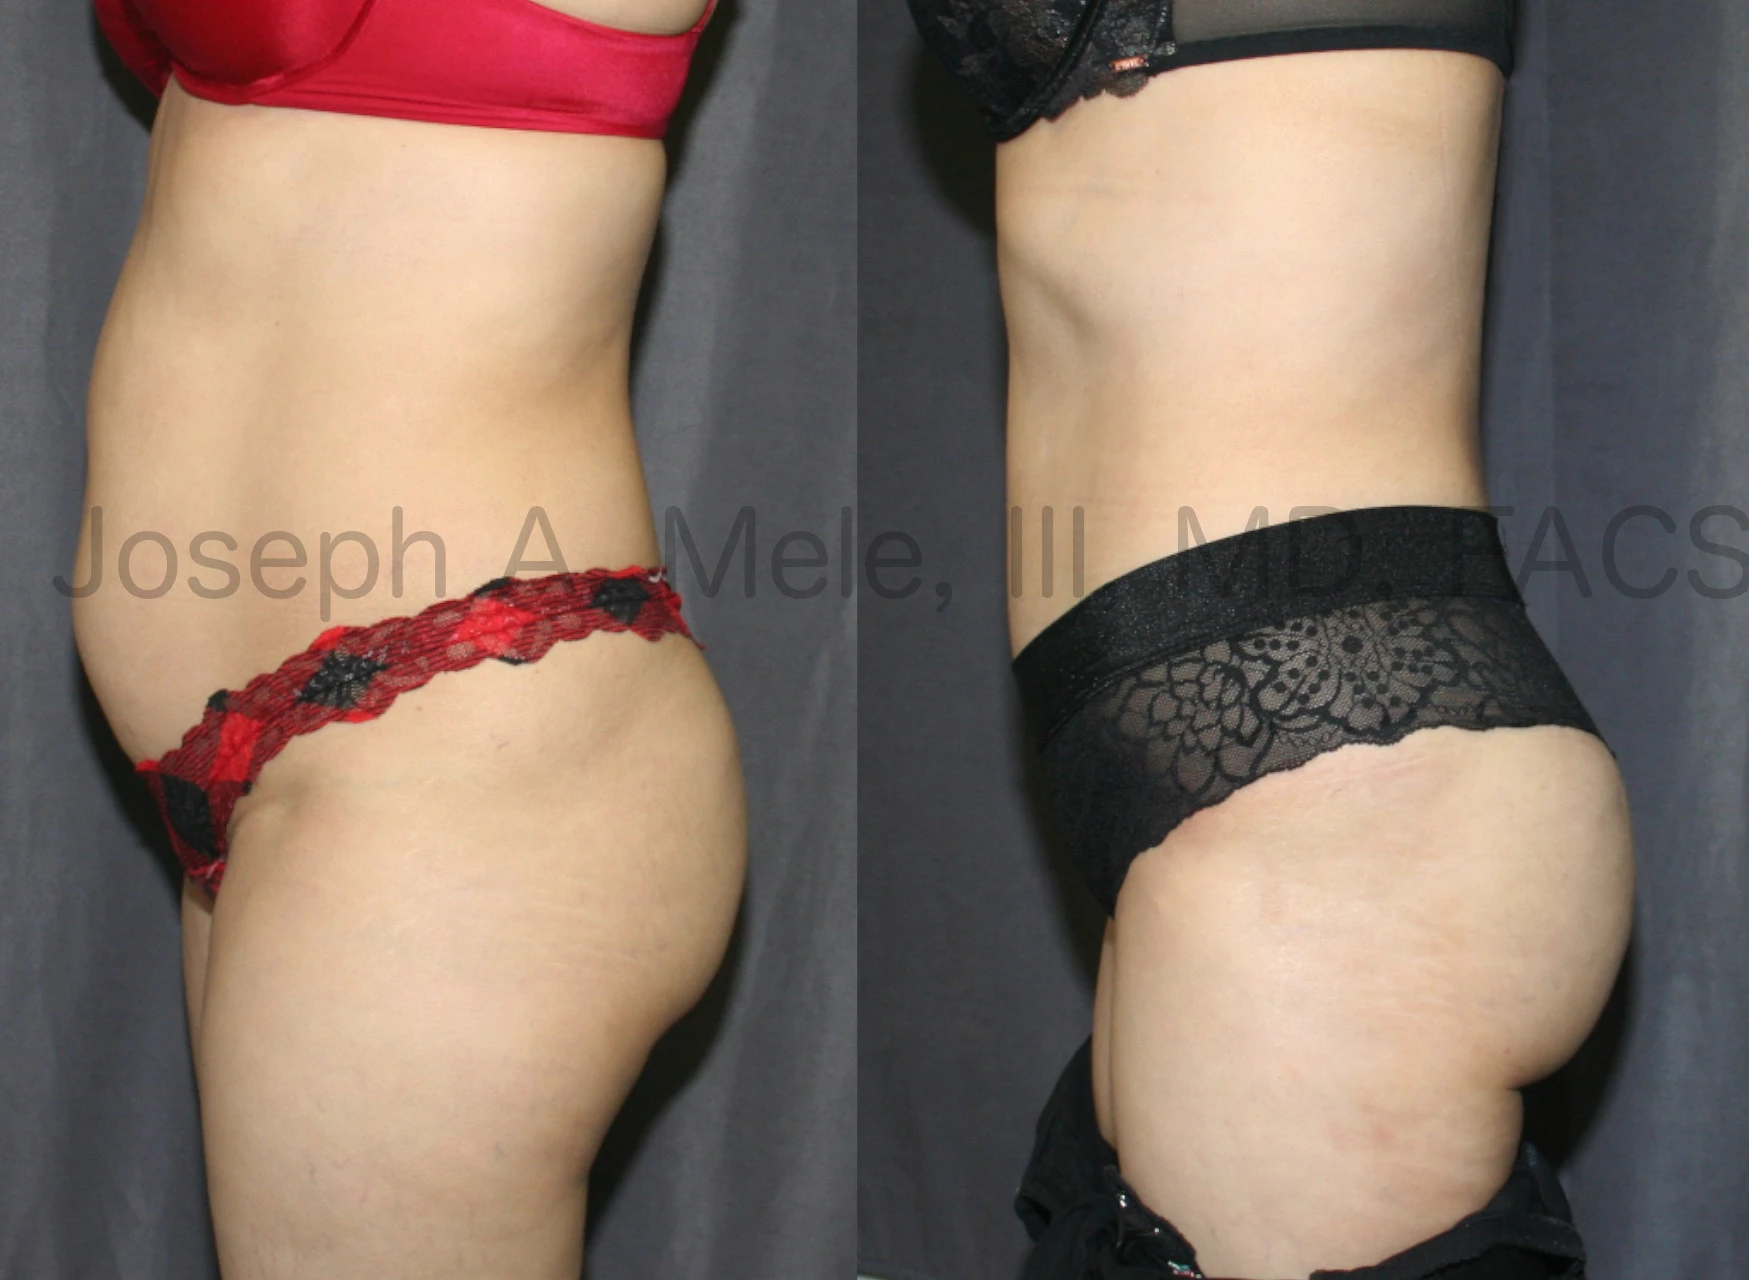 Brazilian Butt Lift and Tummy Tuck before and after pictures (Brazilian Tummy Tuck)